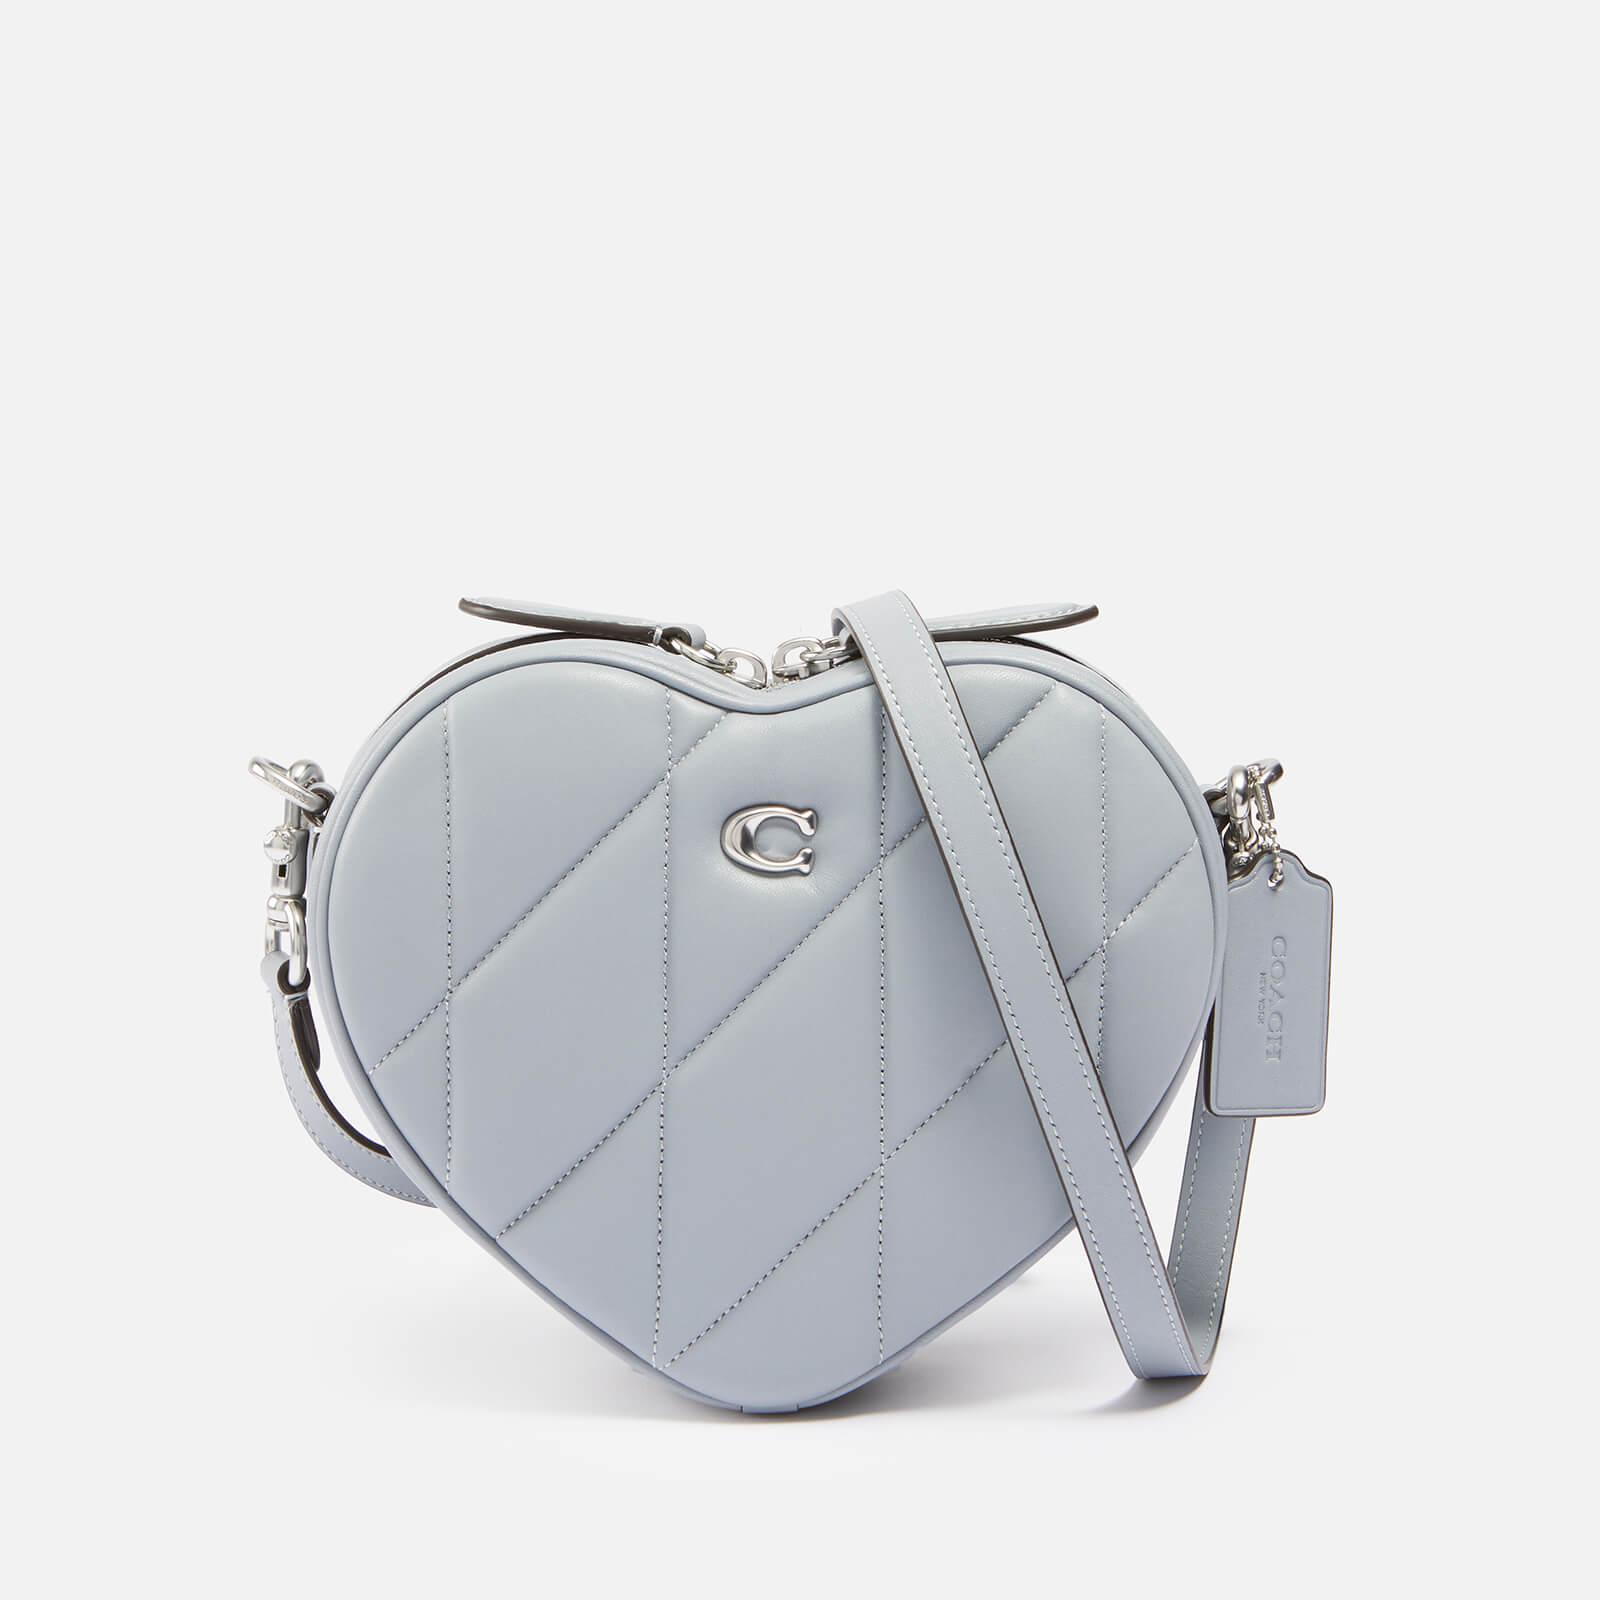 COACH Heart Quilted Leather Crossbody Bag in Gray